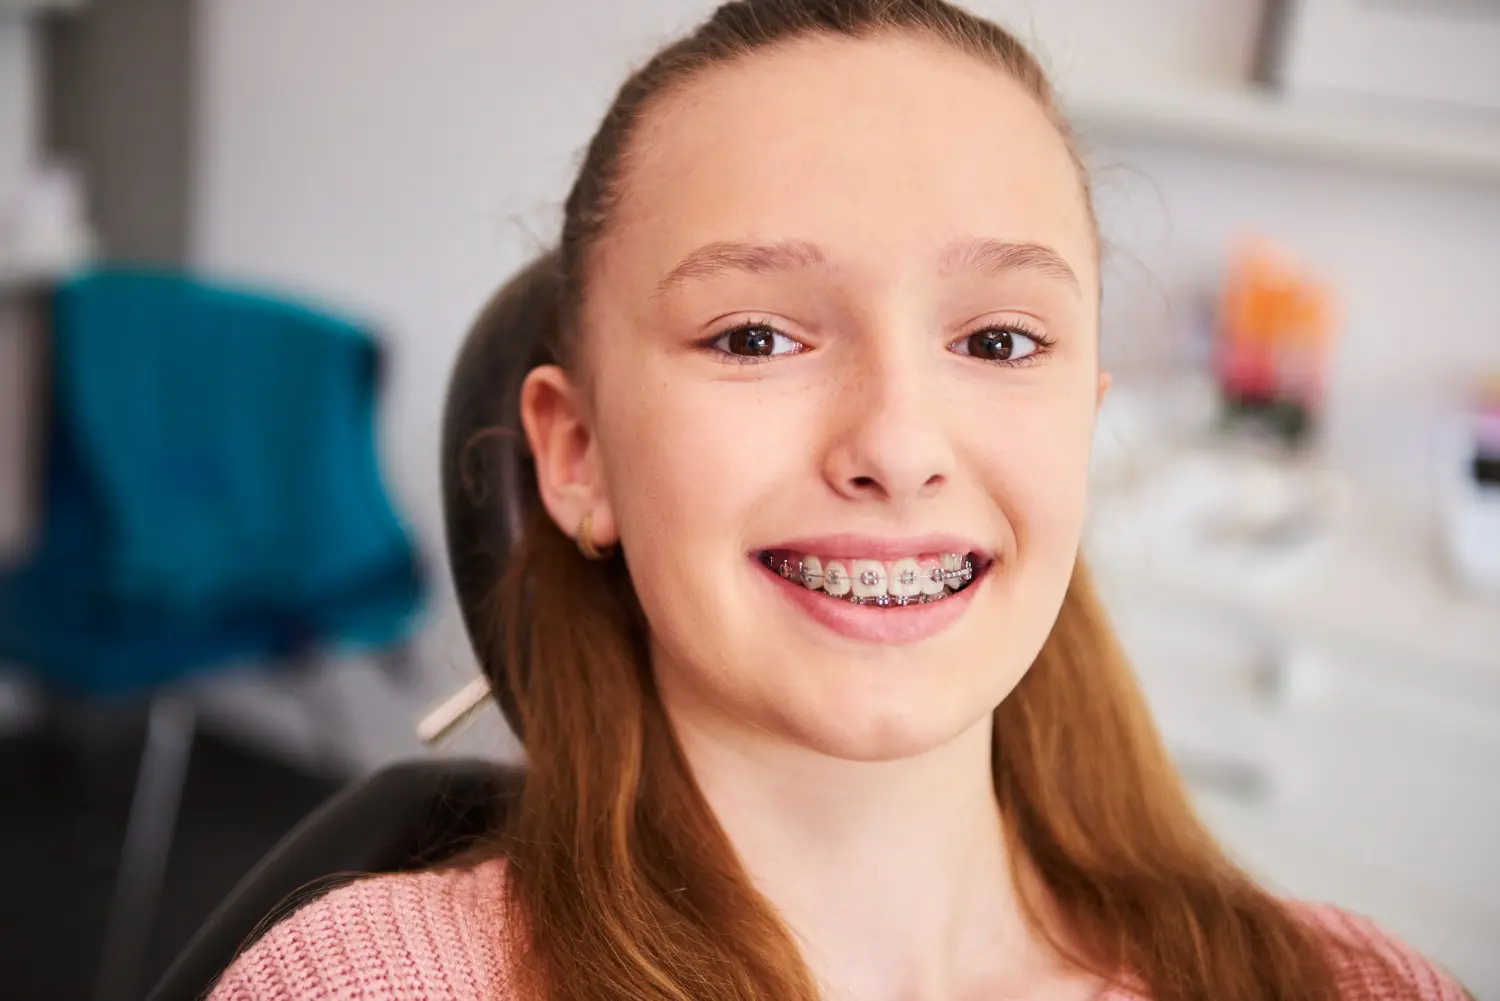 Women Smiling with dental braces